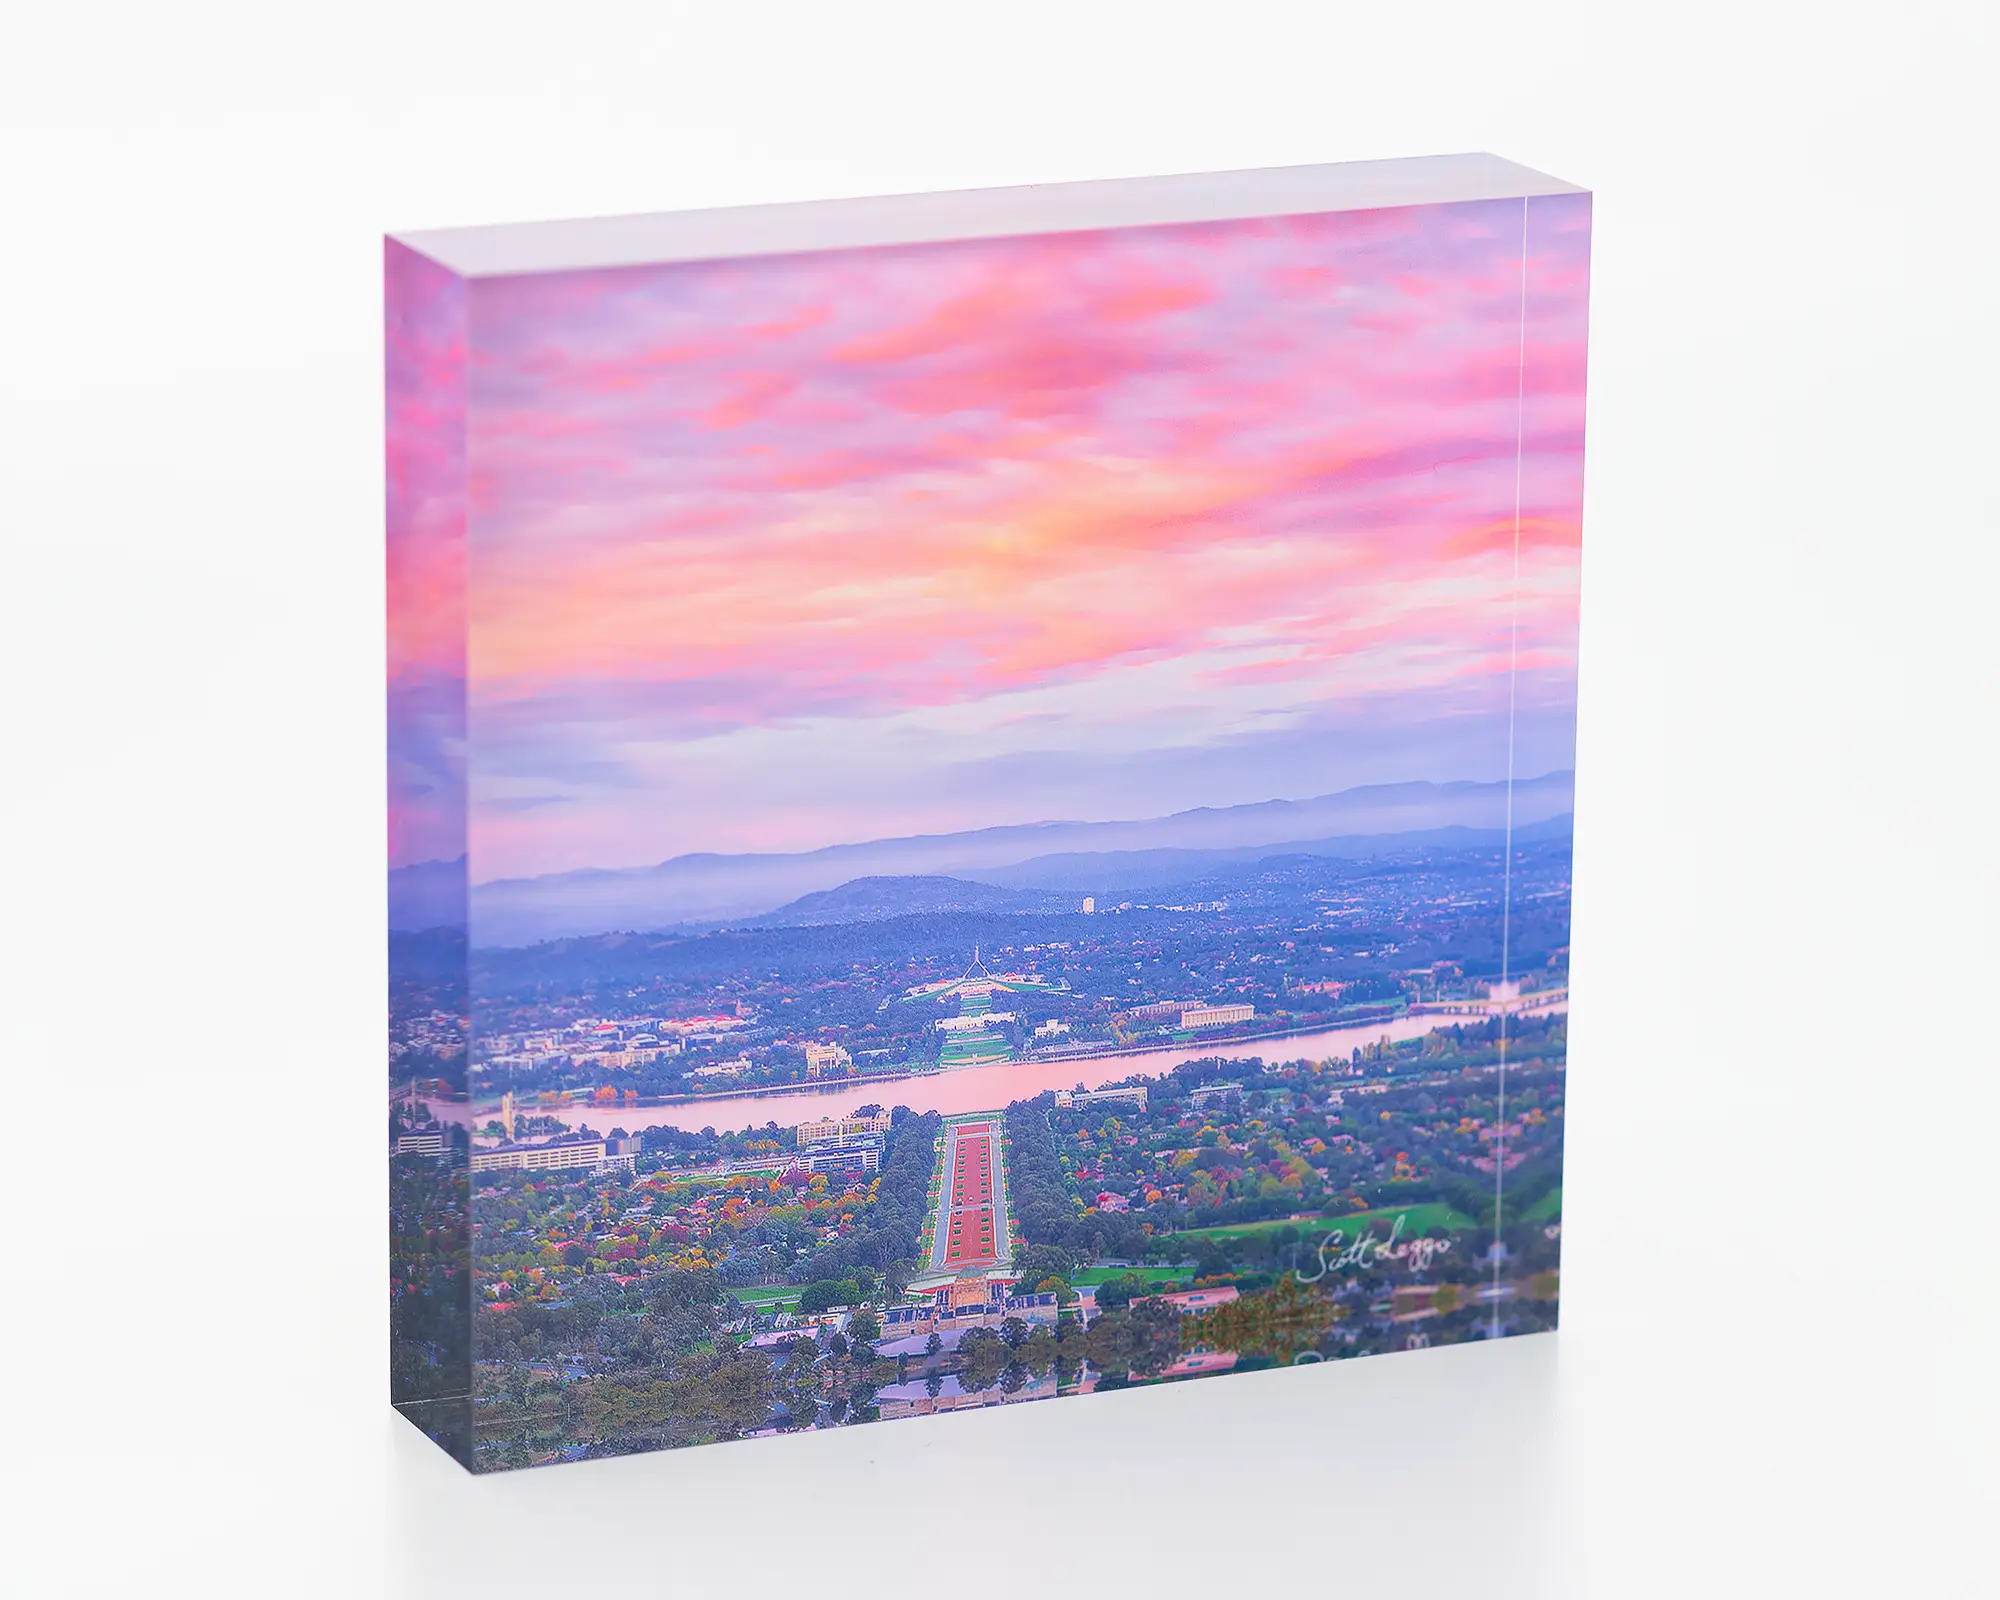 Colours Of Canberra acrylic block of colourful sunrise over Canberra.